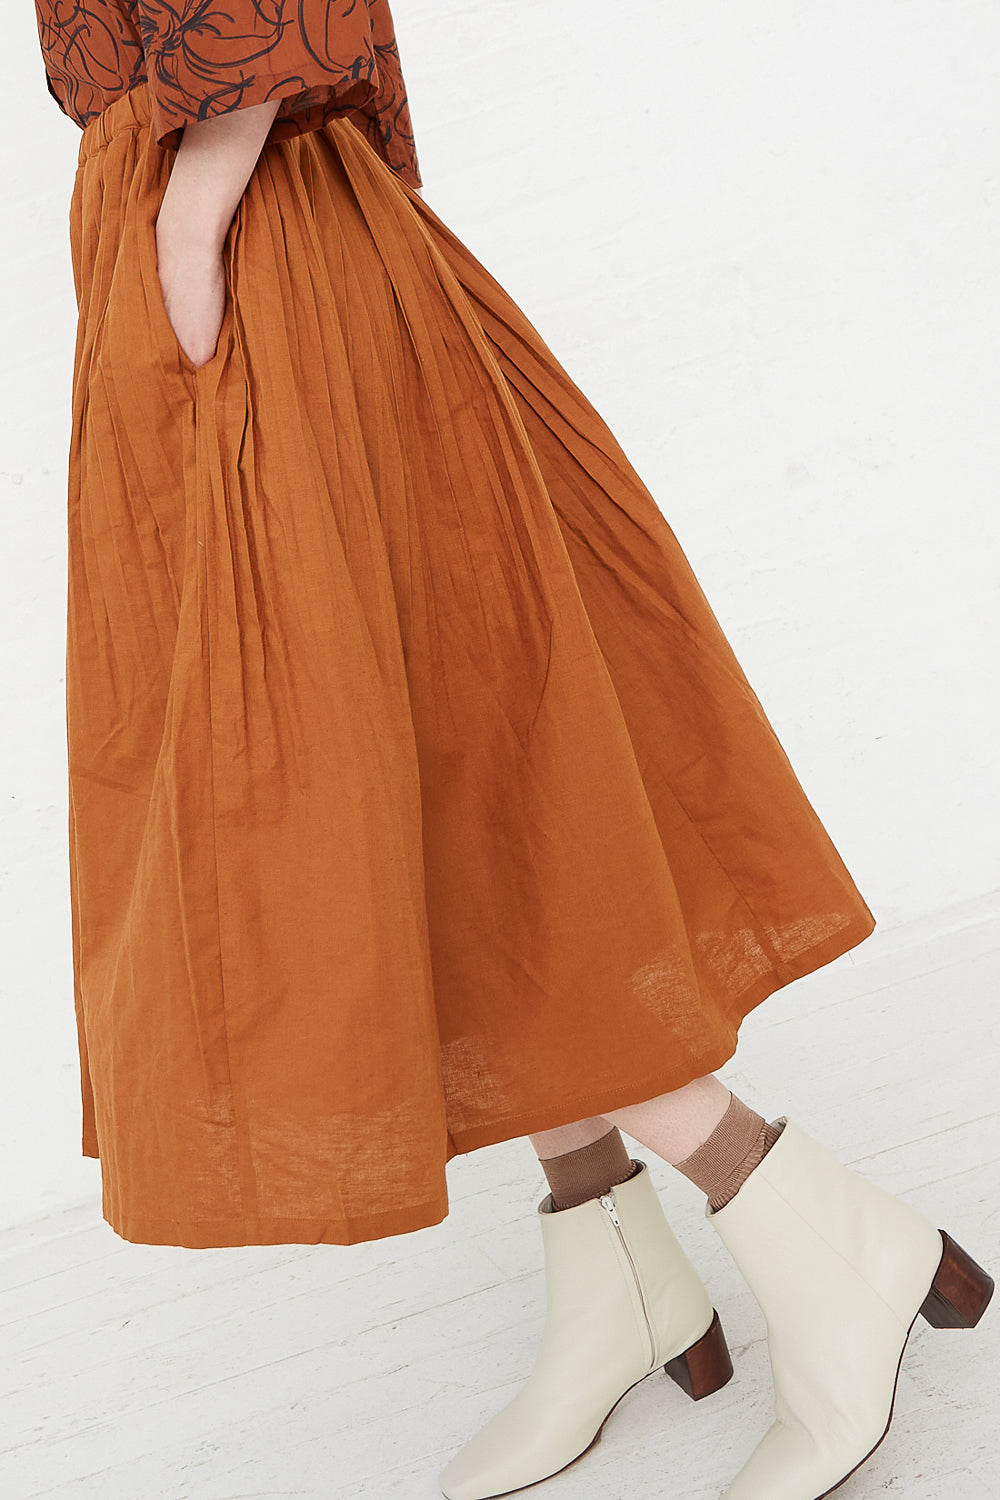 Ichi - Skirt in Camel side view with hand in pocket